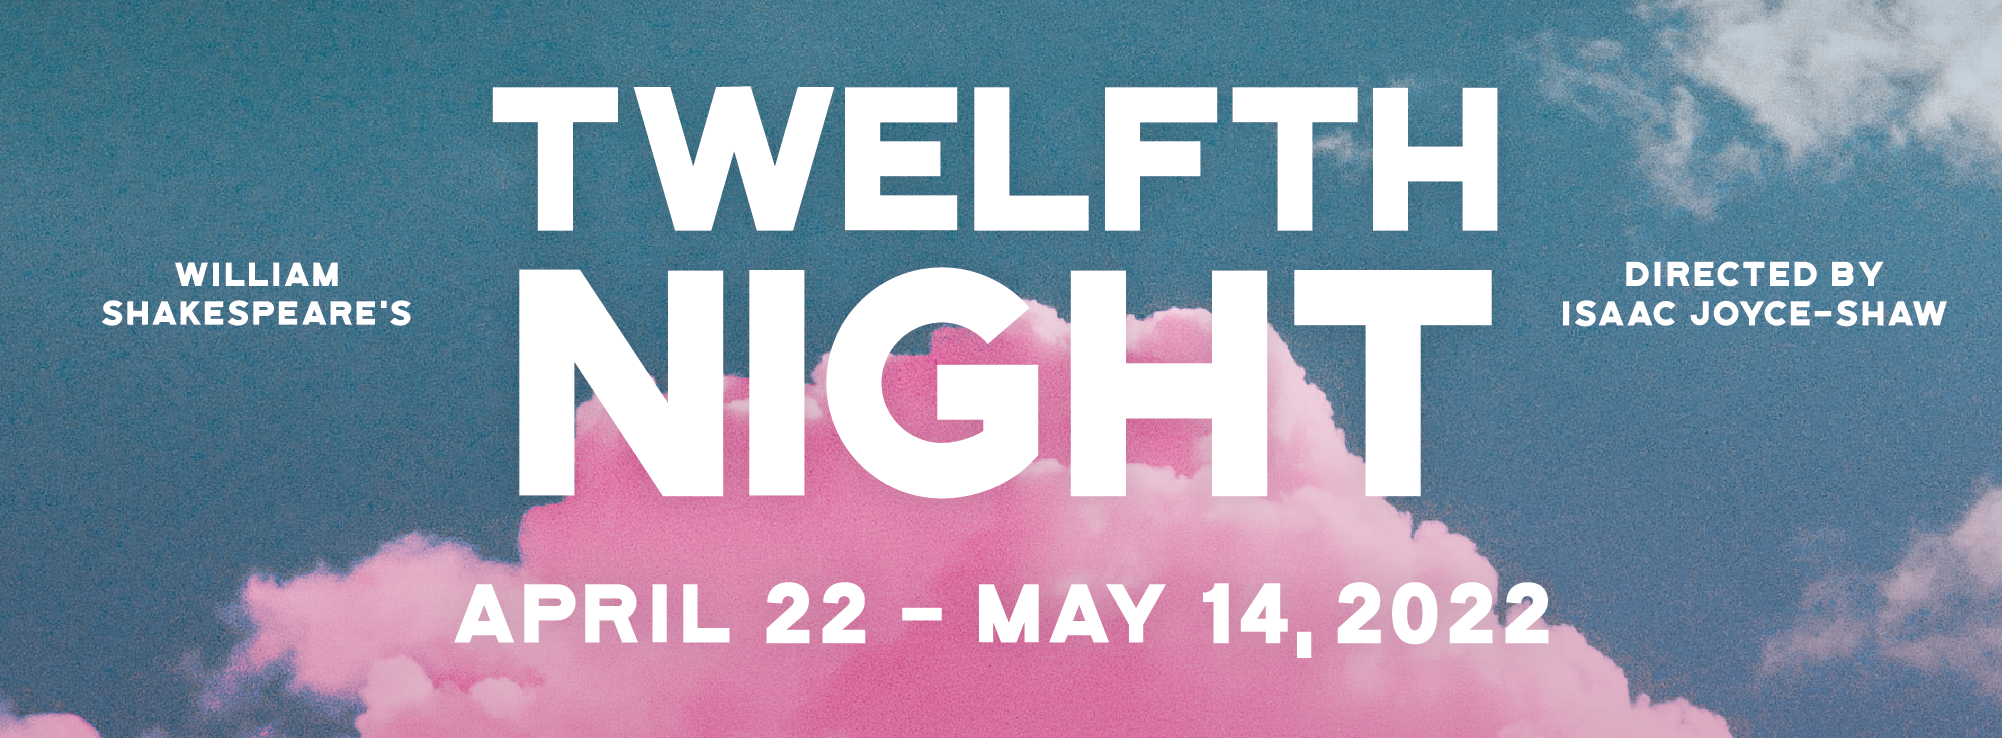 Shakespeare comedy Twelfth Night opens April 22